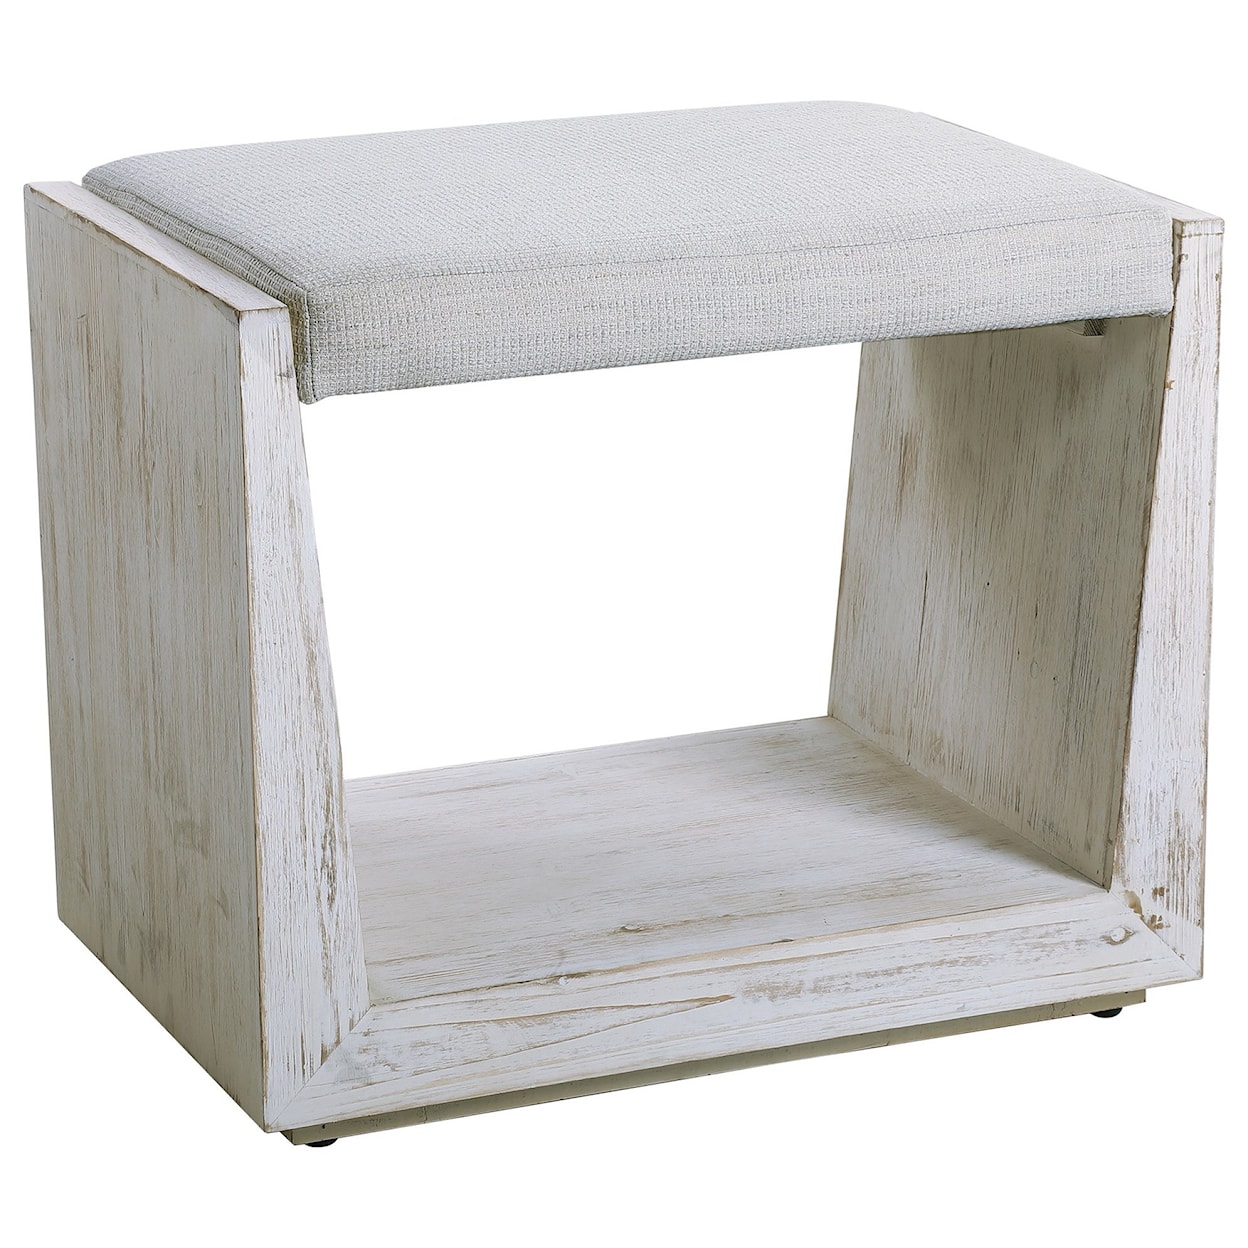 Uttermost Accent Furniture - Benches Cabana White Small Bench